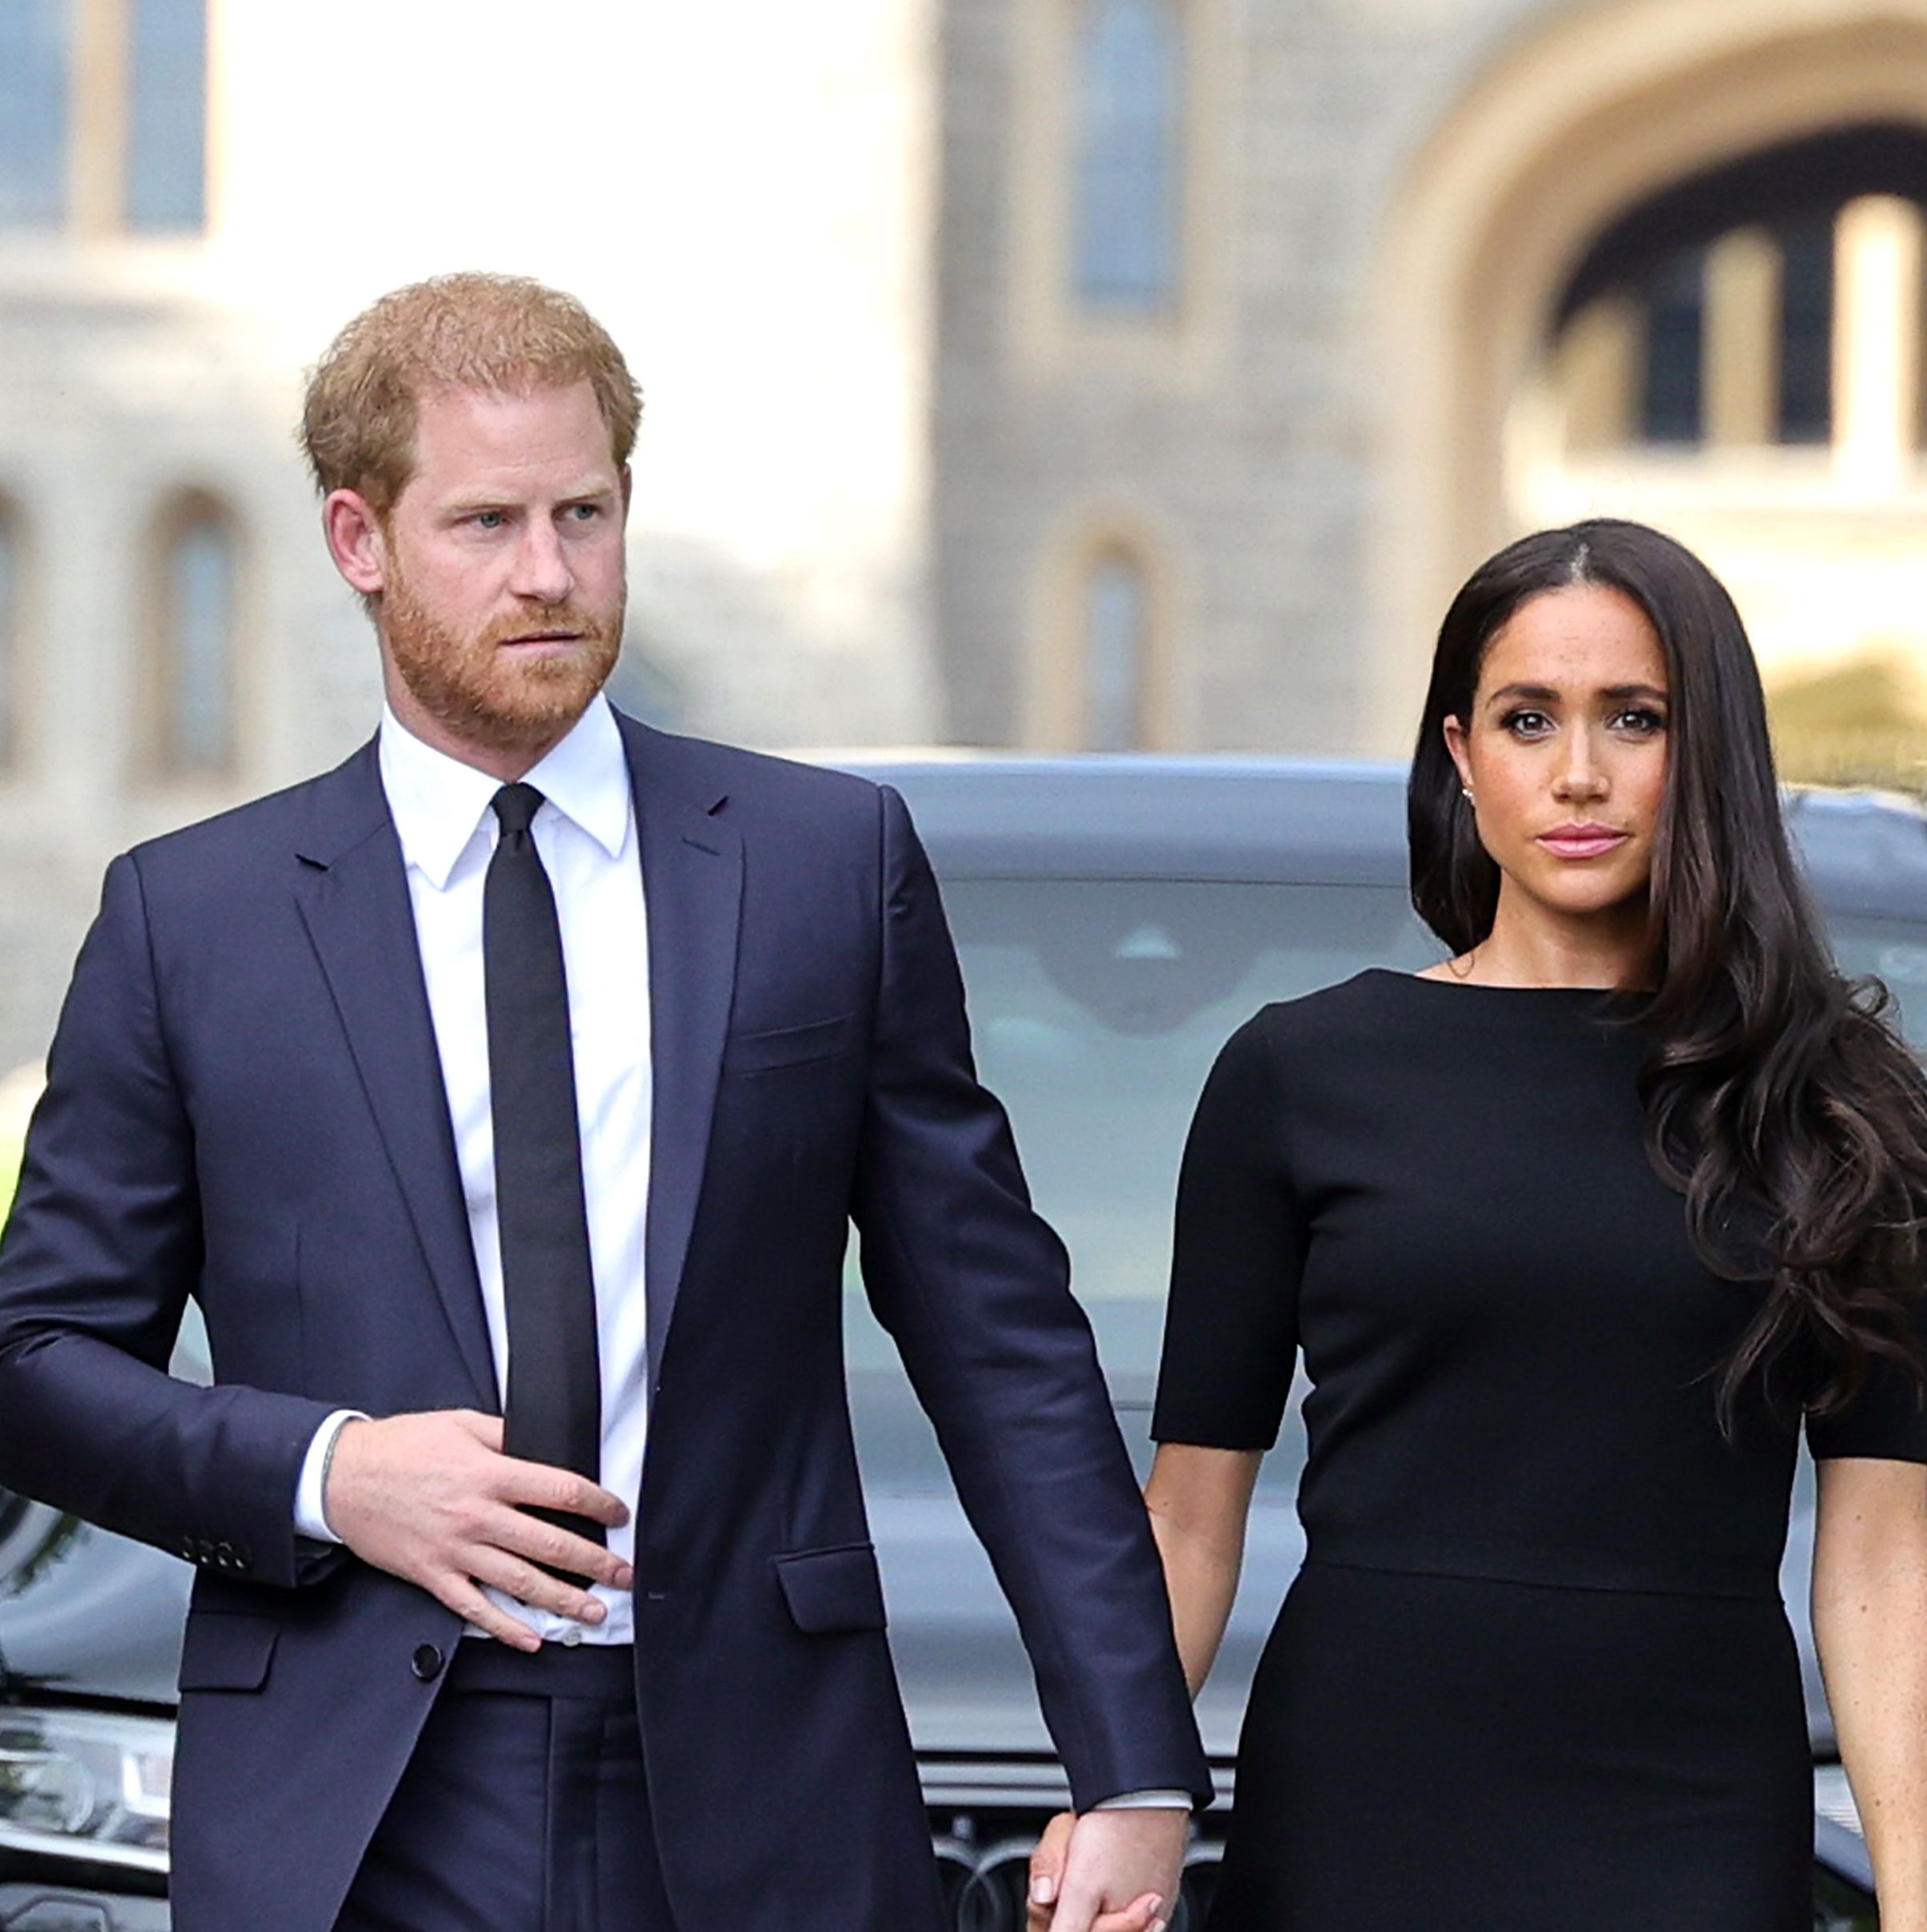 Archie's birthday played a role in Meghan's decision to stay in California. But there's more to the story, a close friend tells People.